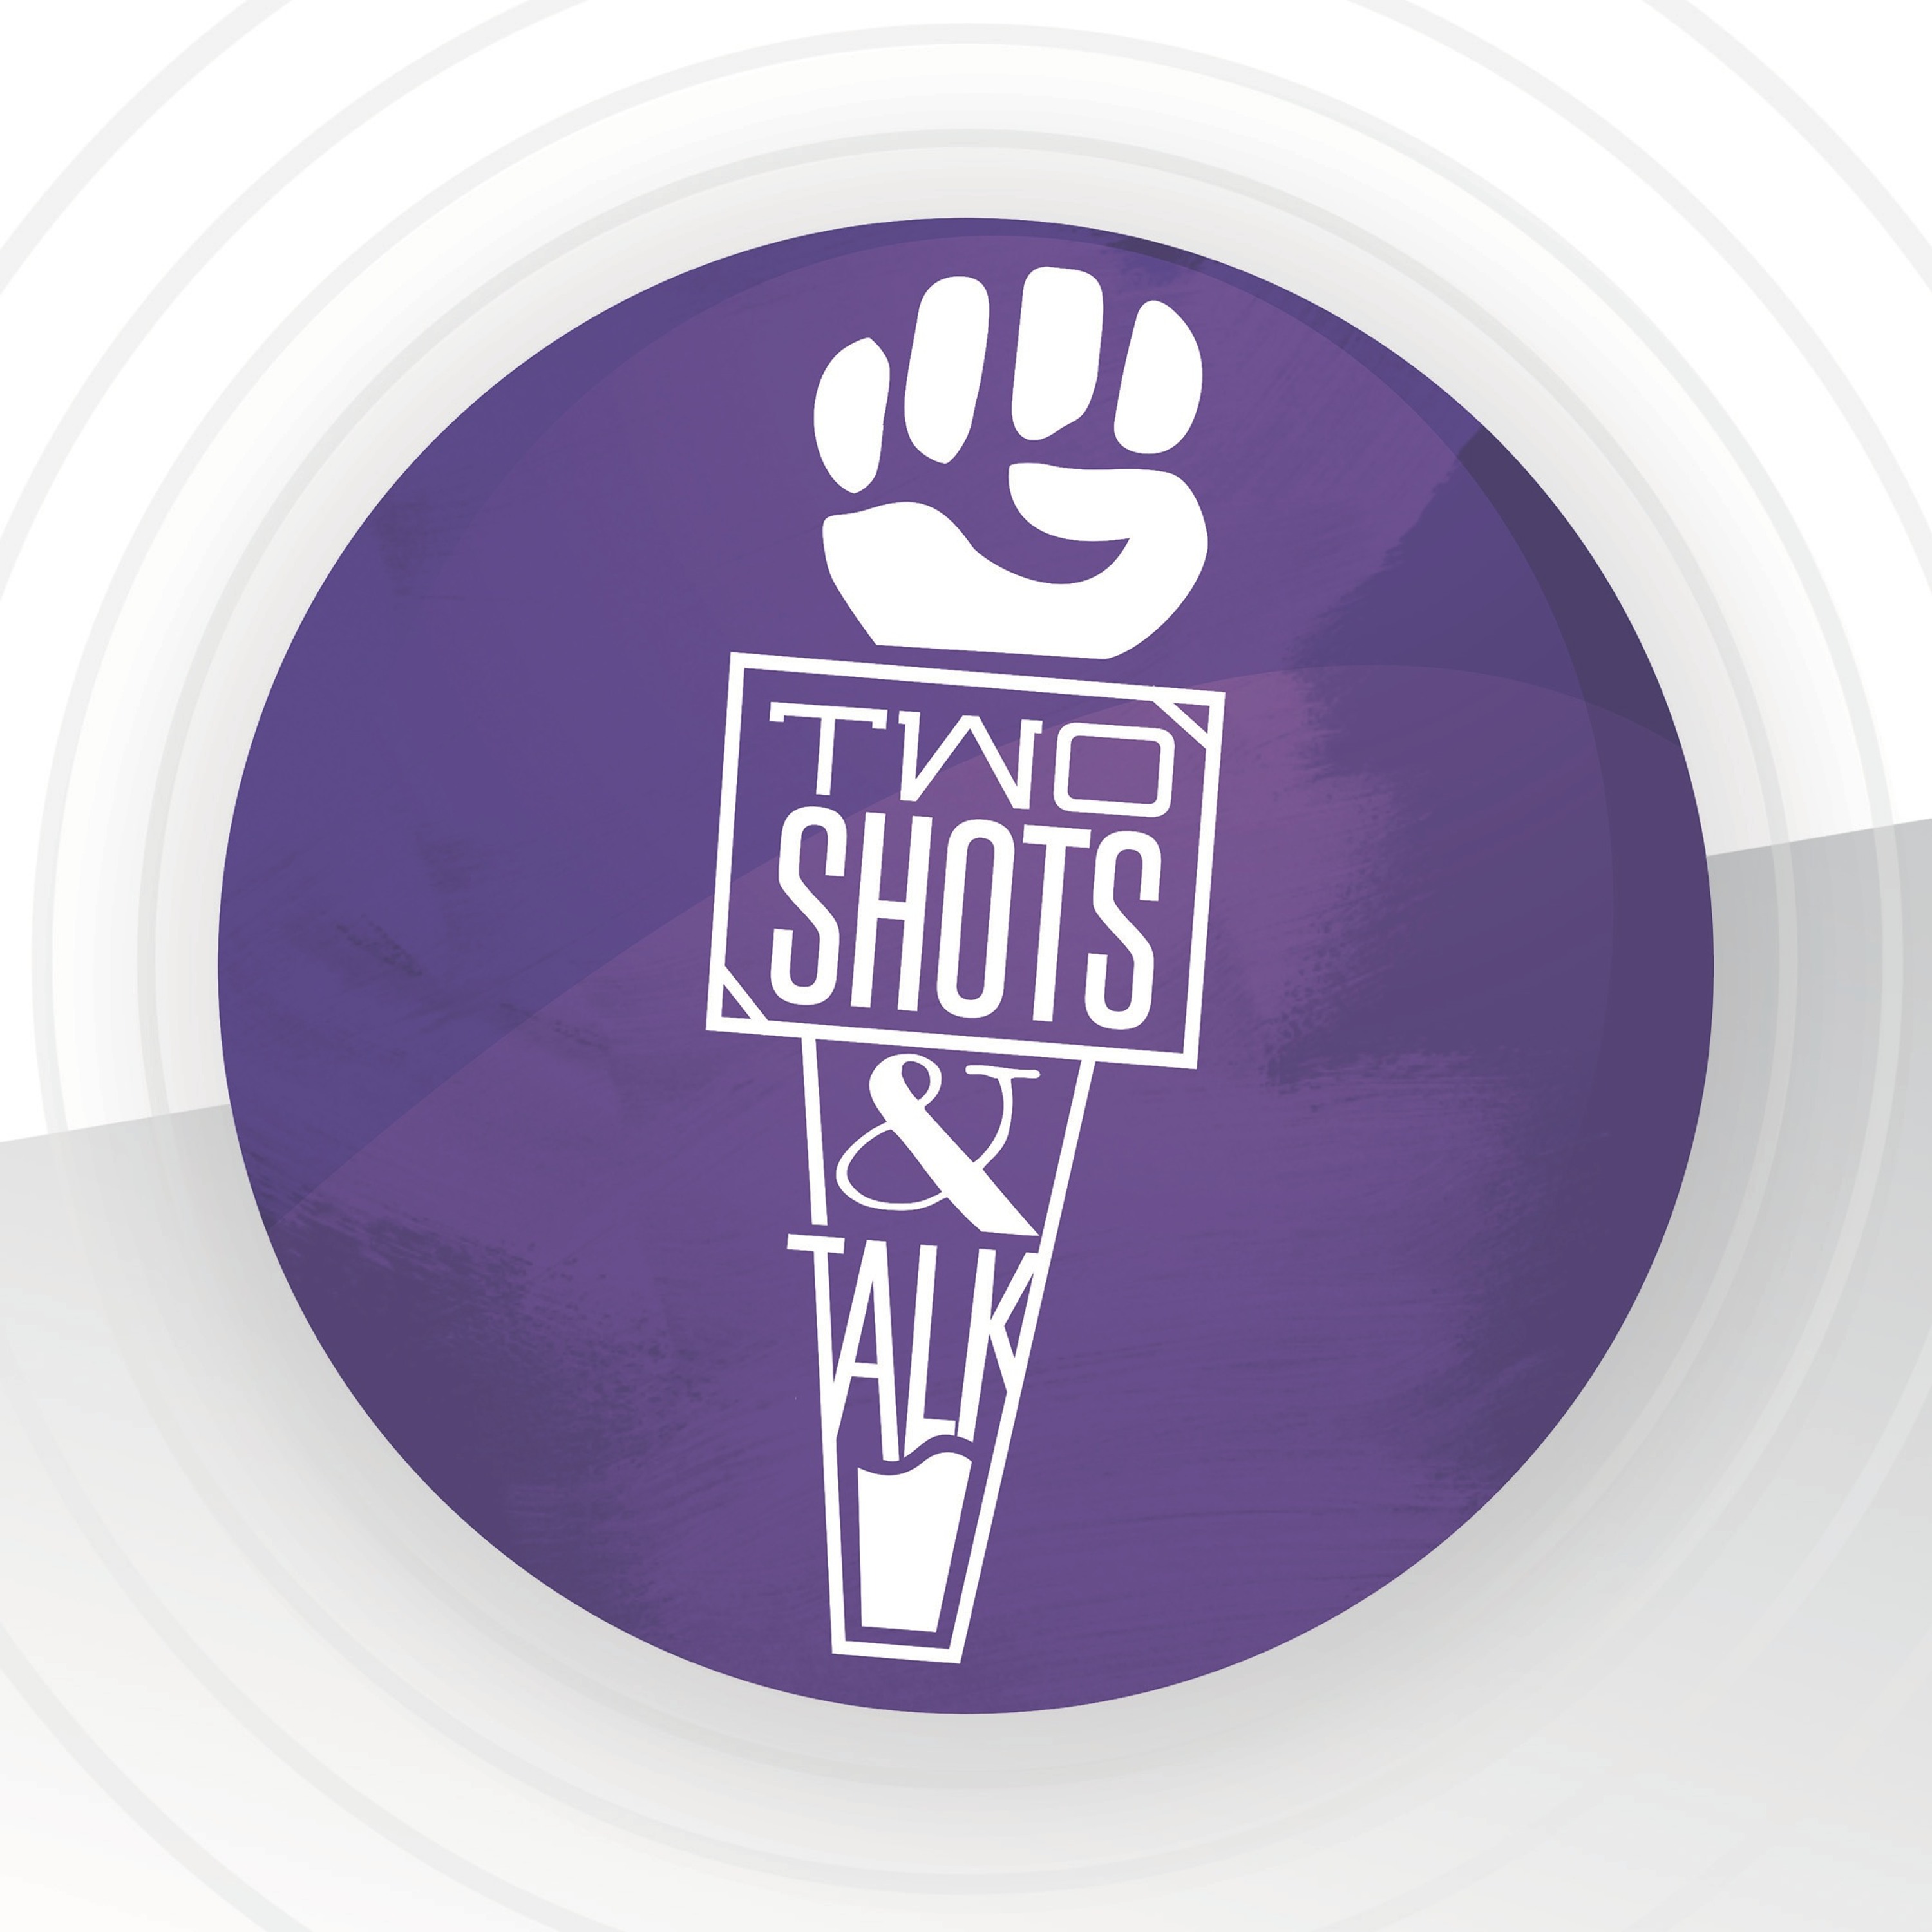 2 Shots & Talk Ep 116: ”Love Is...Potential?”